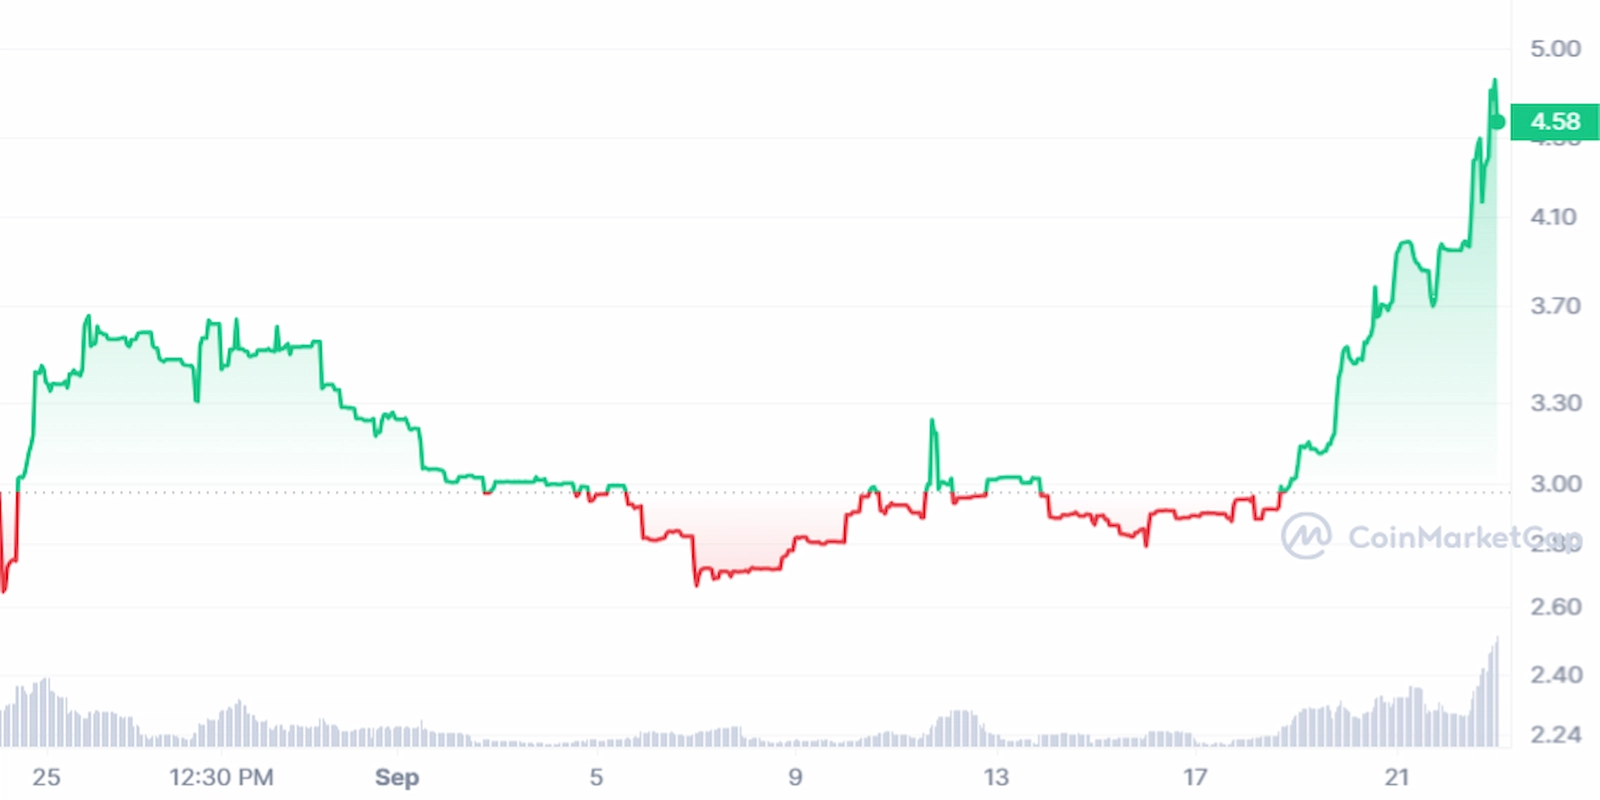 HERA price chart for the past 30 days. 